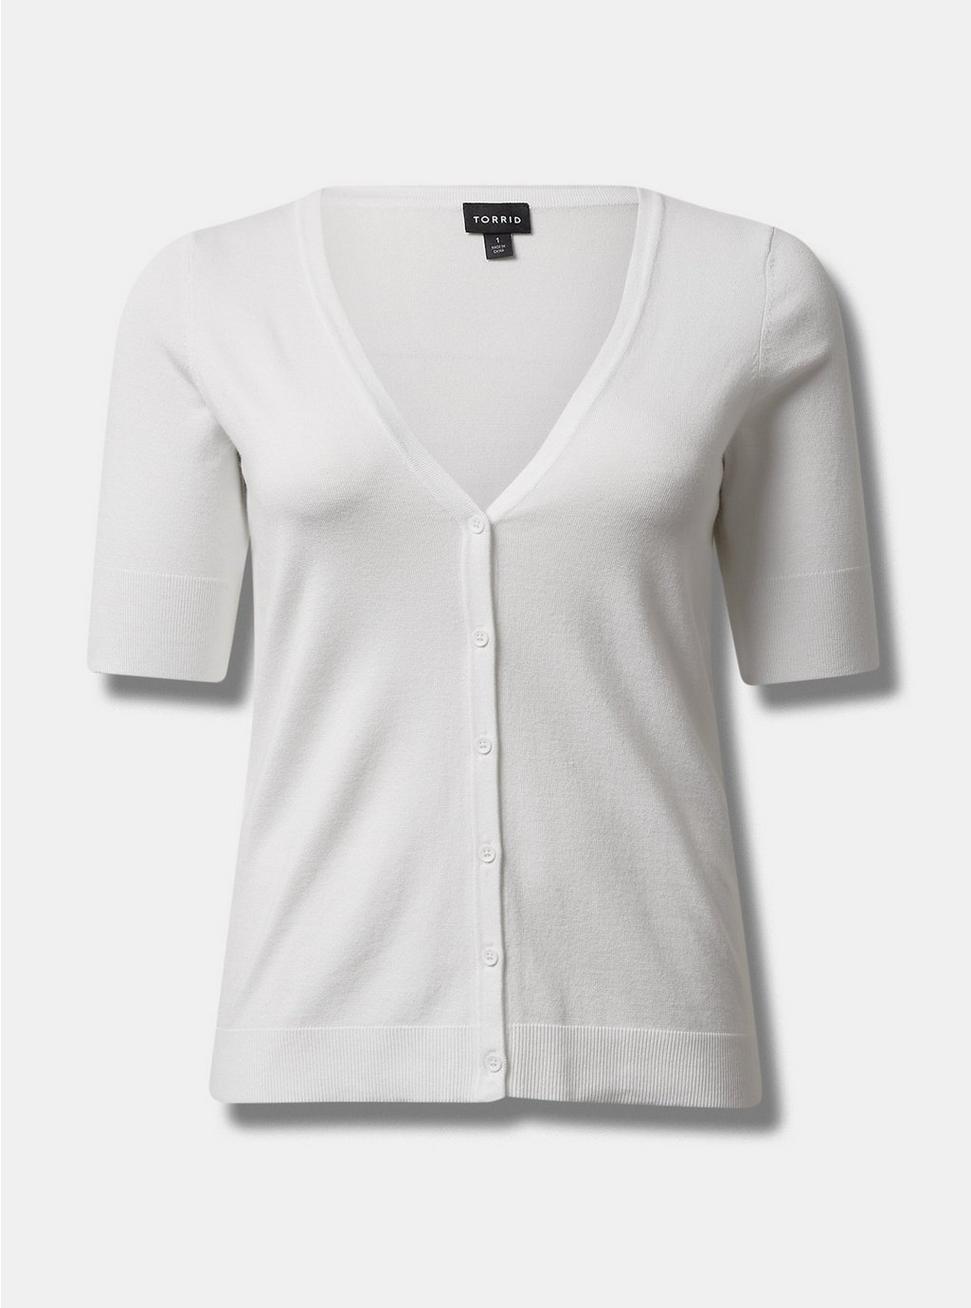 Cardigan V-Neck Fitted Sweater, WHITE, hi-res